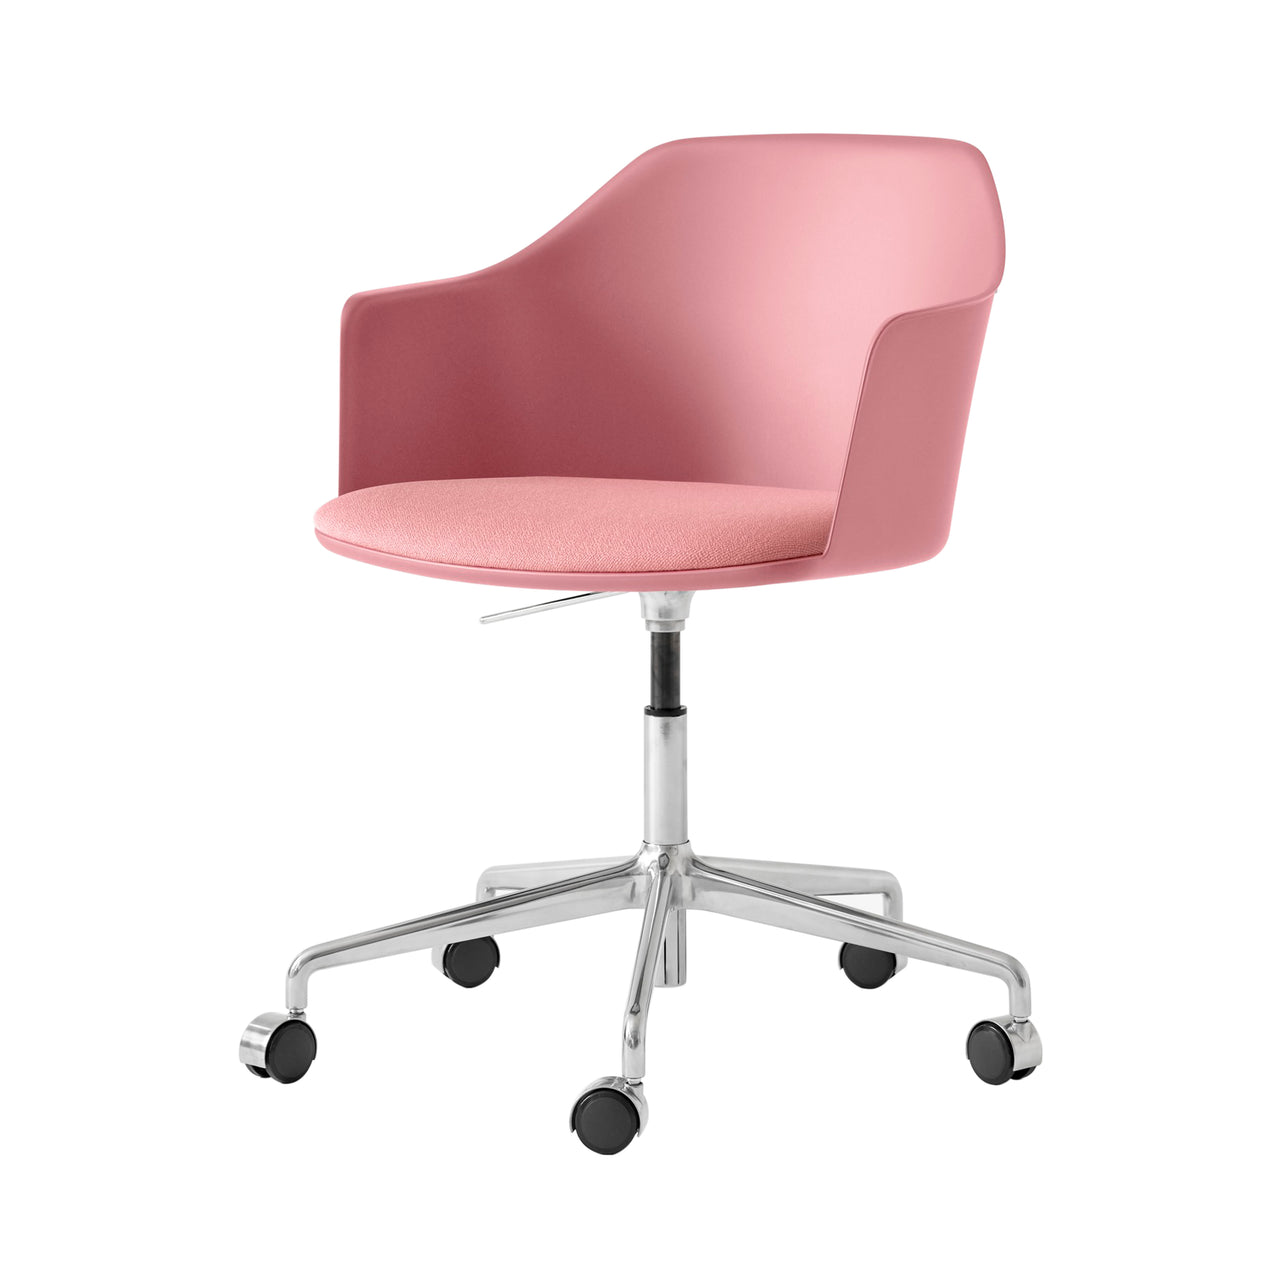 Rely Armchair HW54: Polished Aluminum + Soft Pink